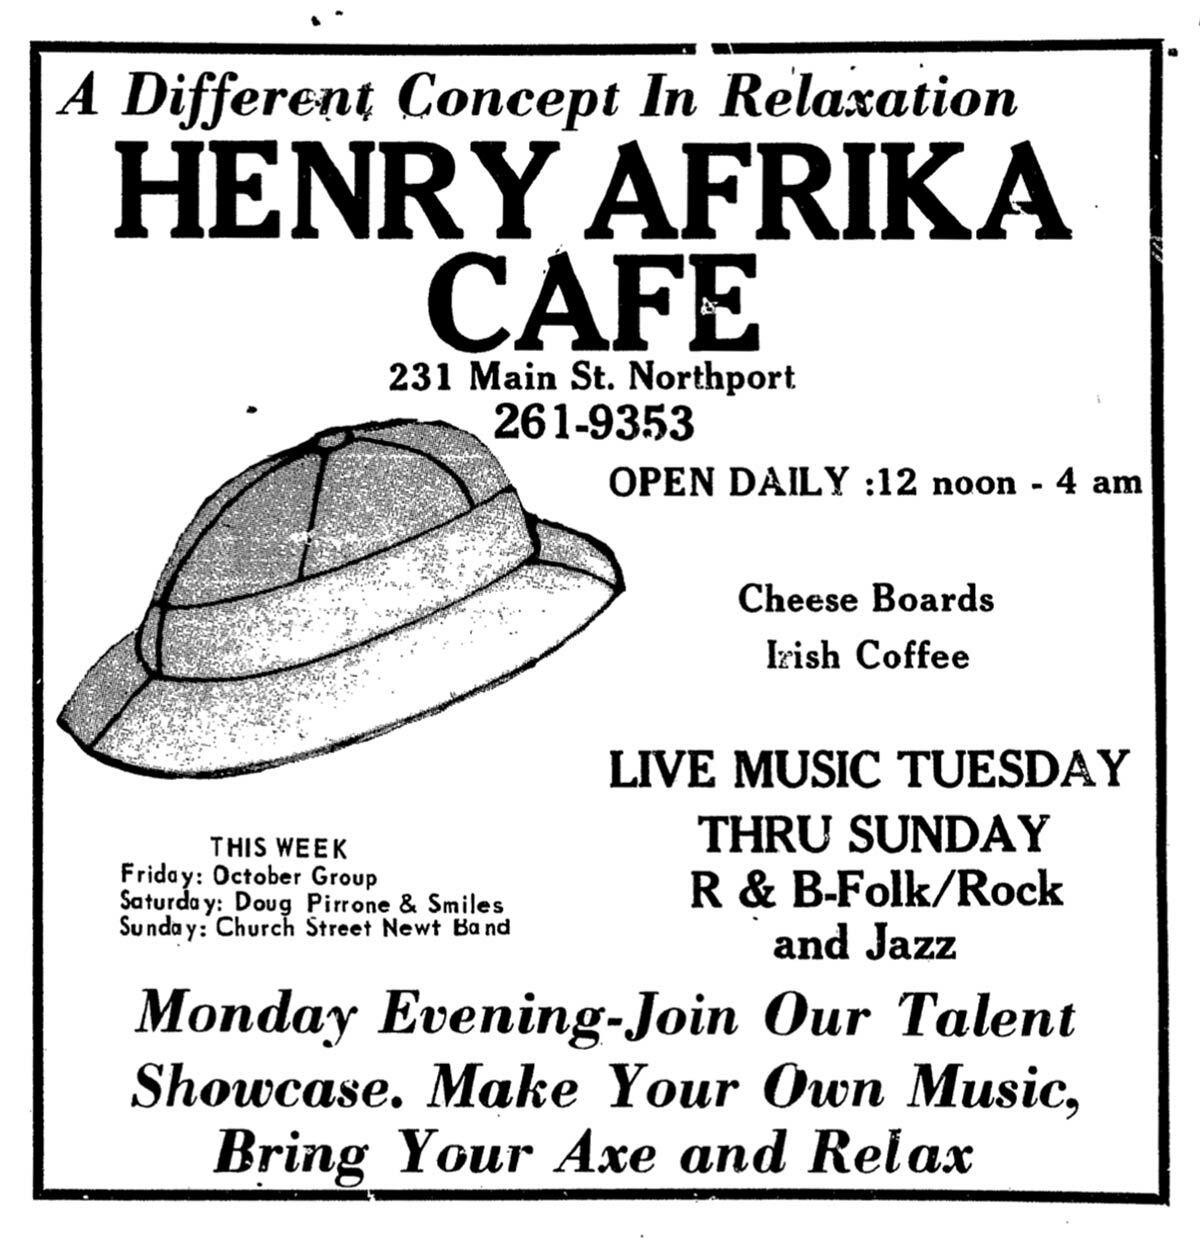 A different concept in relaxation. An August 1976 ad in the then Northport Journal.